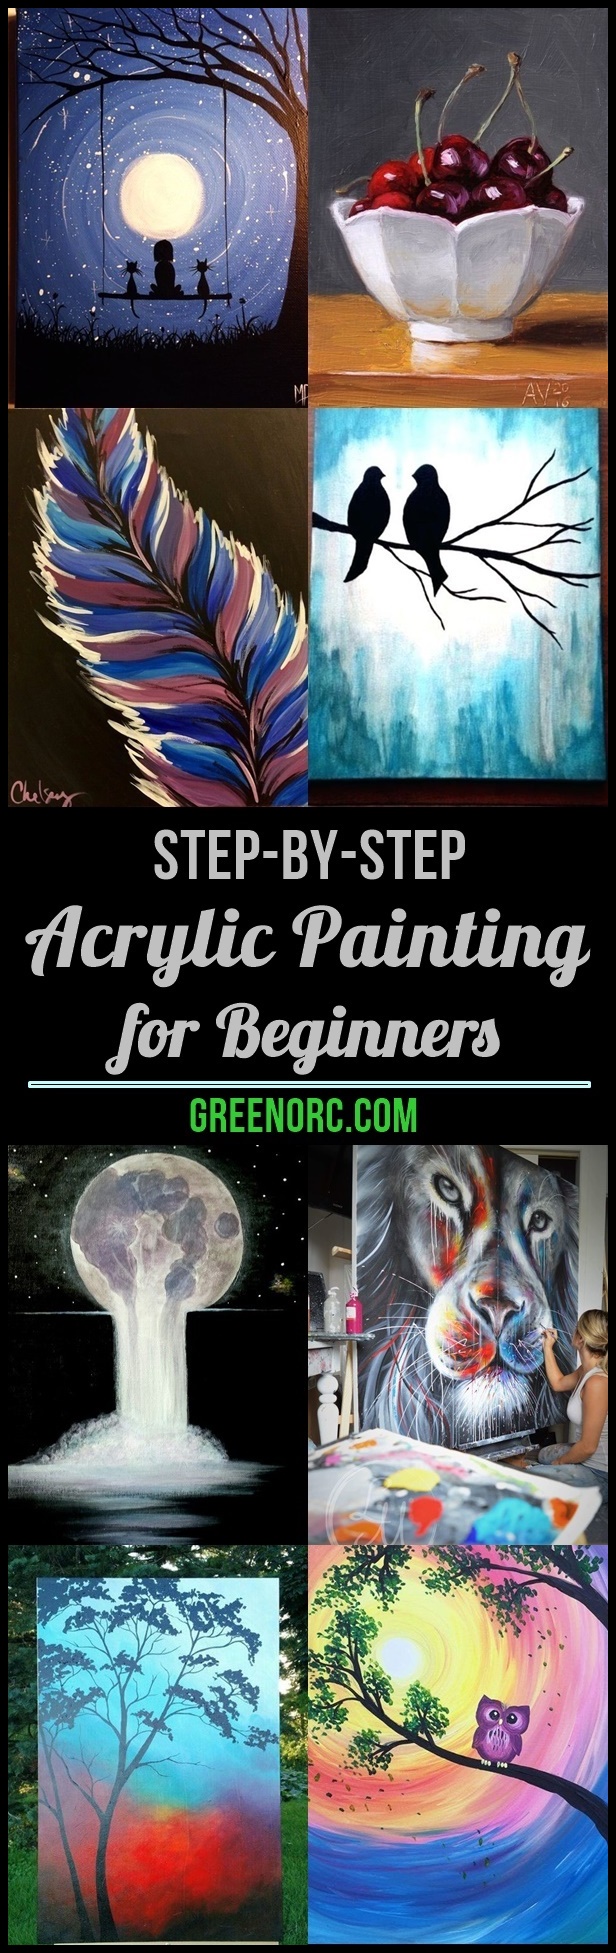 Step-by-Step Acrylic Painting for Beginners